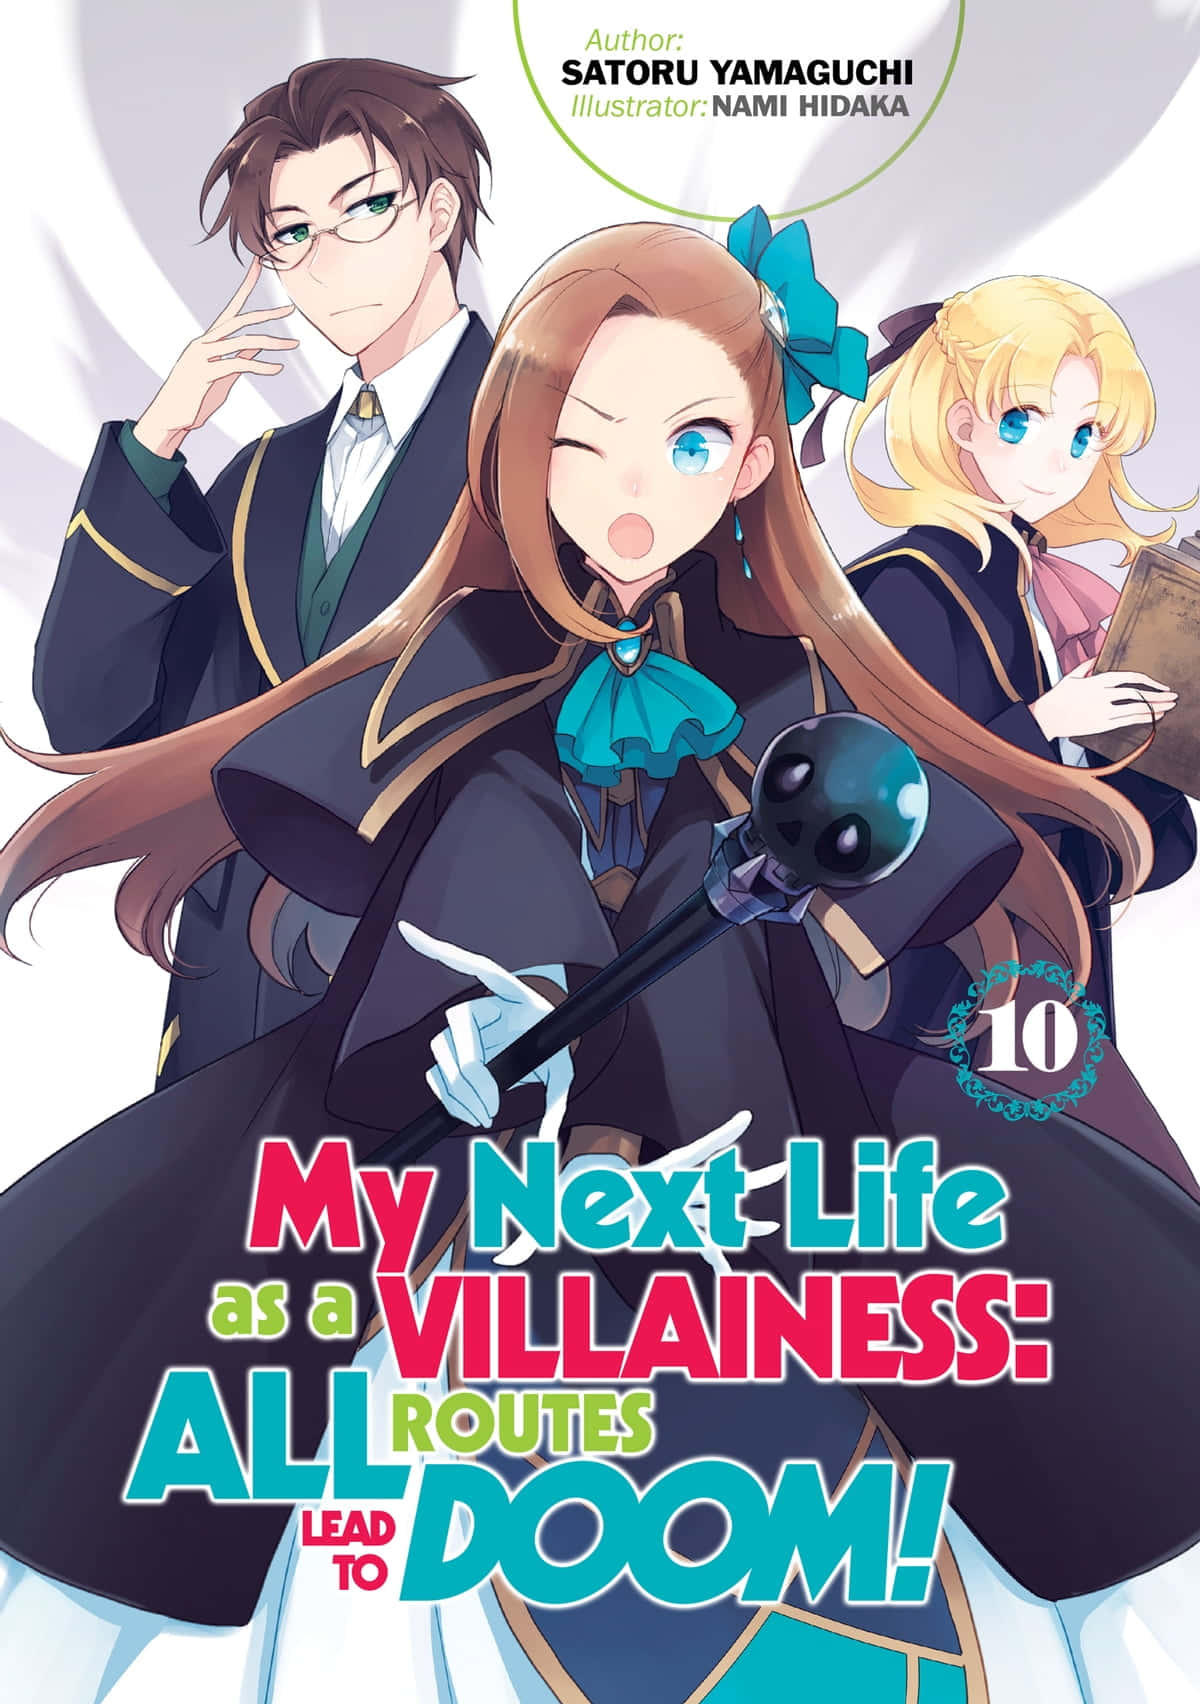 "Follow the villainous path to doom in 'My Next Life As A Villainess All Routes Lead To Doom'" Wallpaper